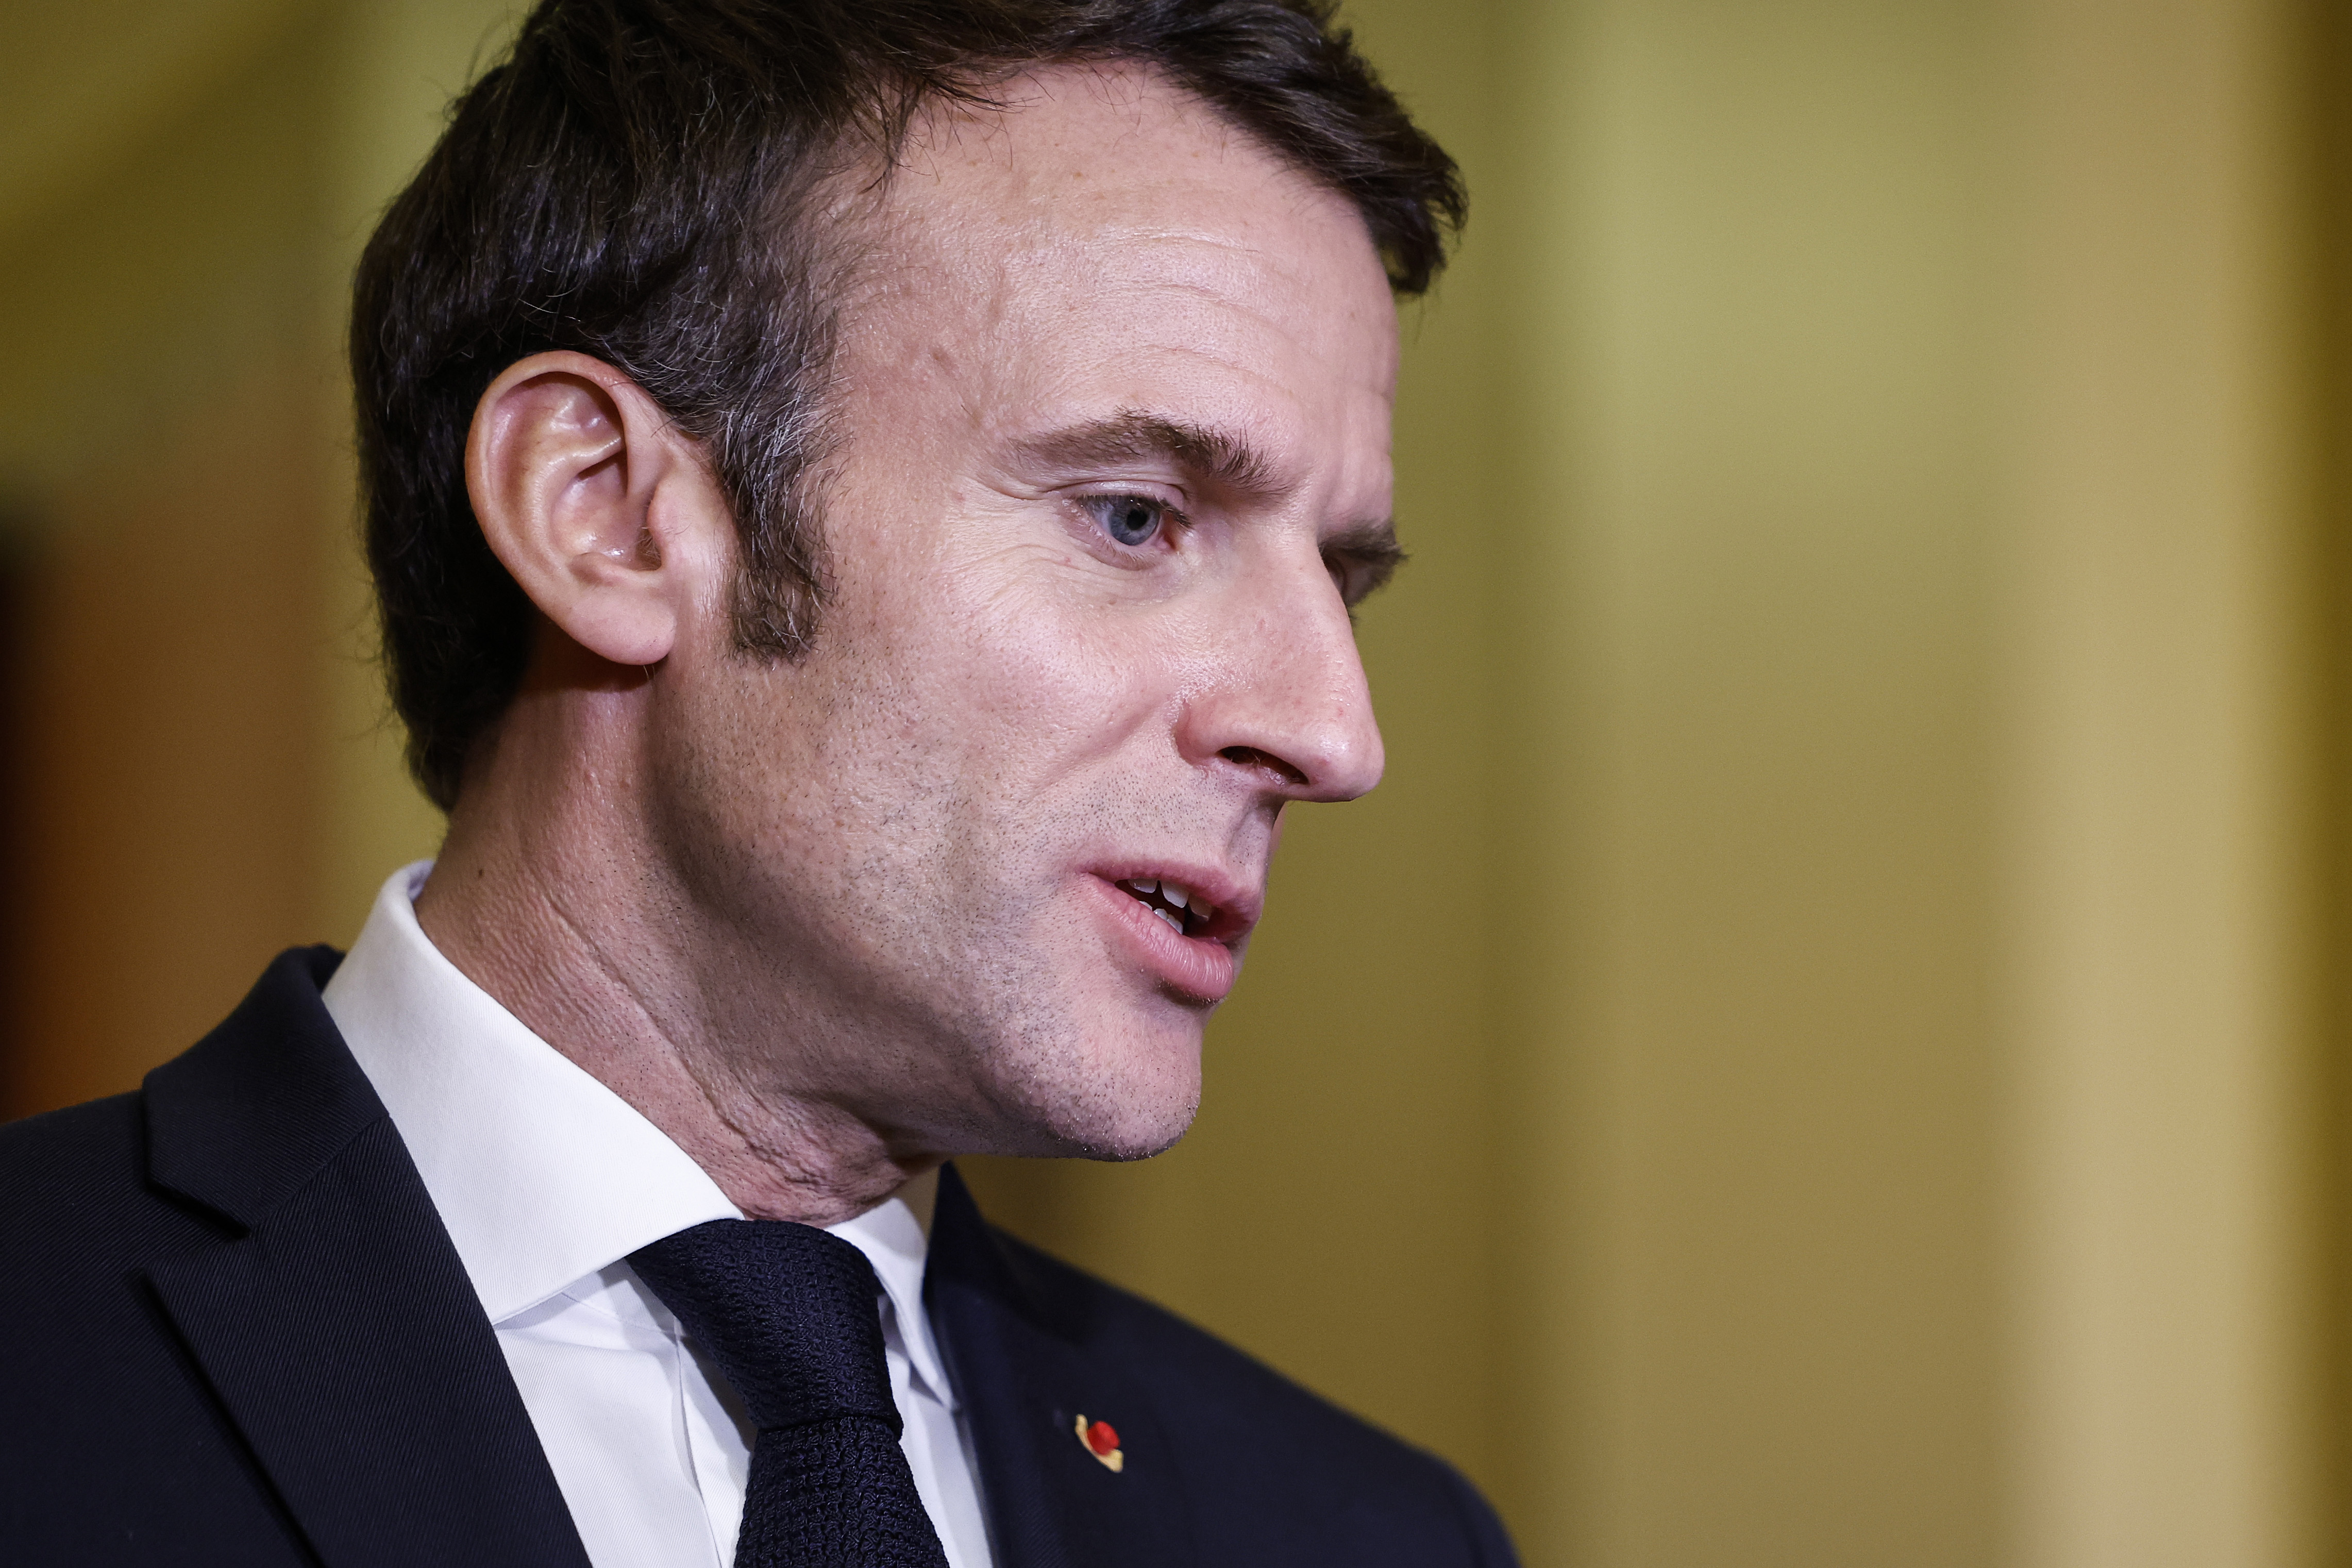 France: Macron’s Election Campaign Investigated